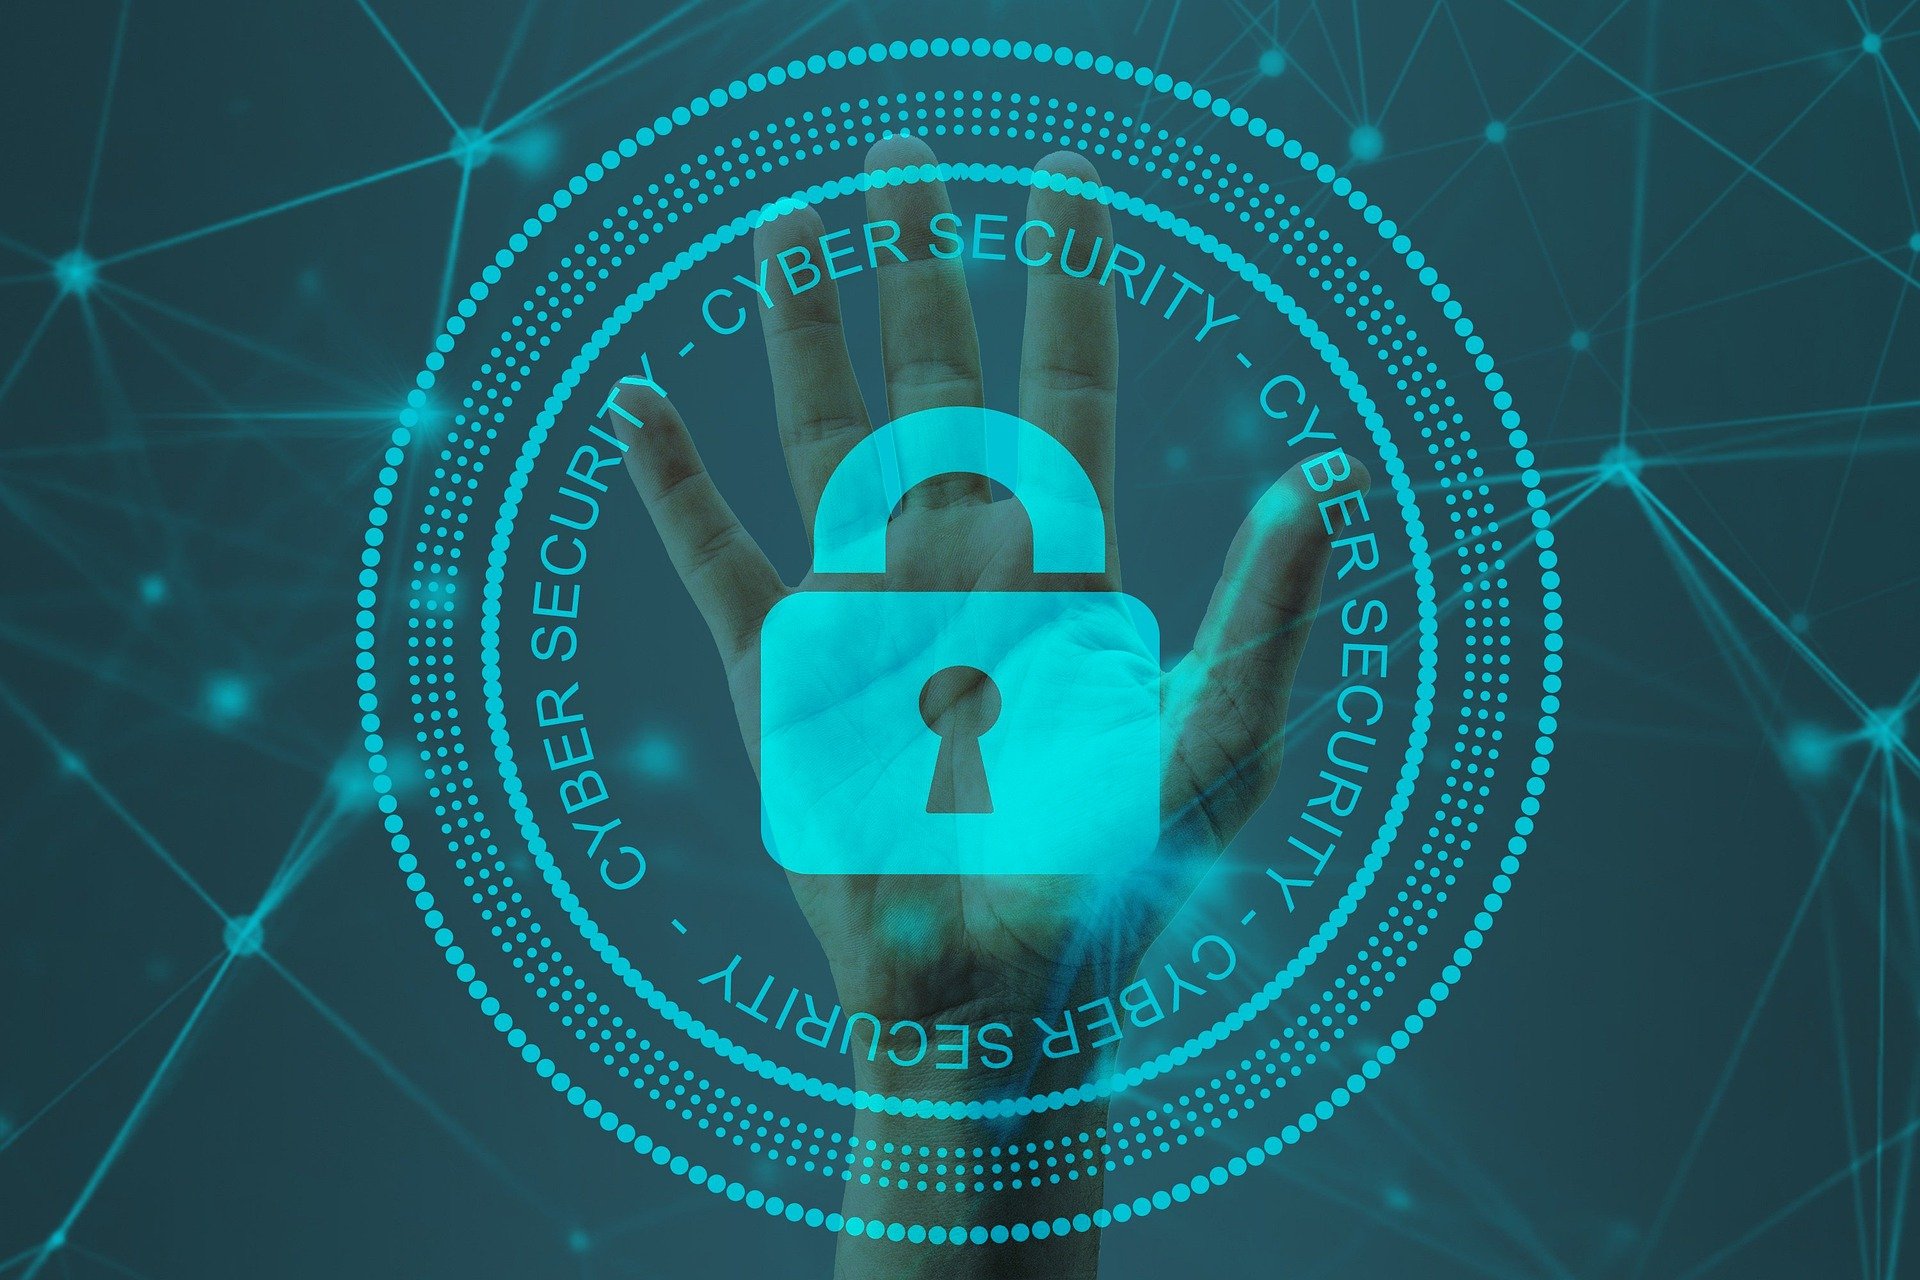 5 New Cybersecurity Challenges in 2022 | Greenlight Cyber